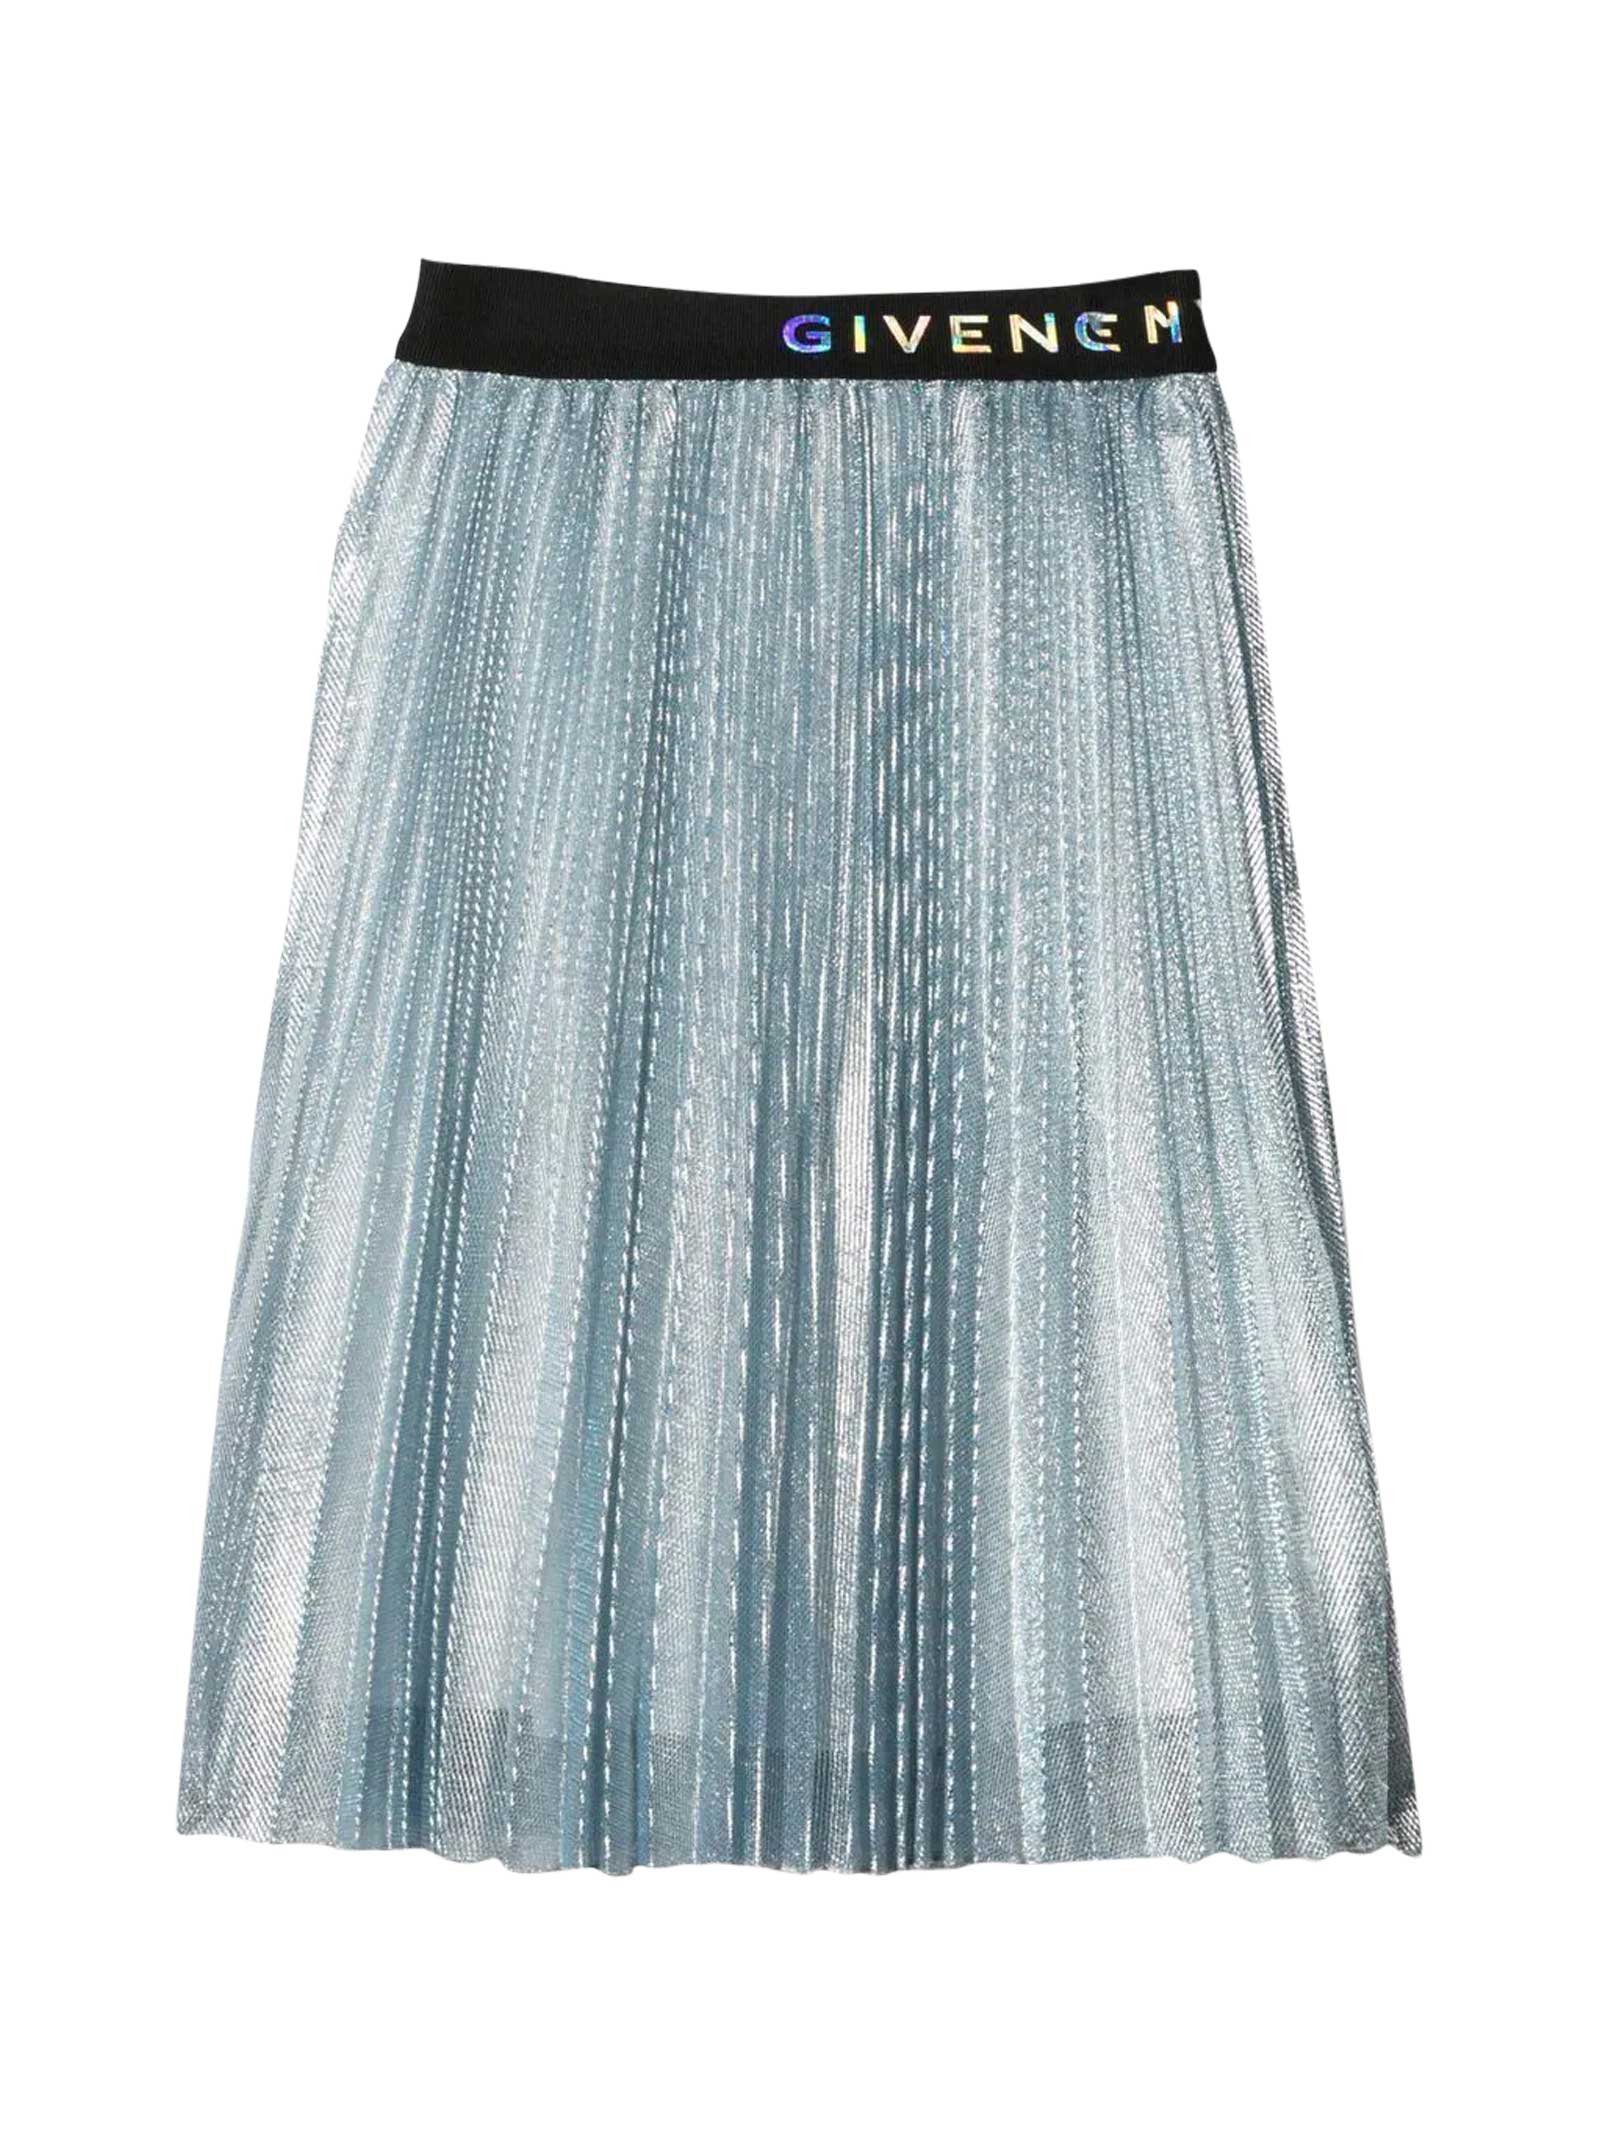 Givenchy Pleated Blue Skirt